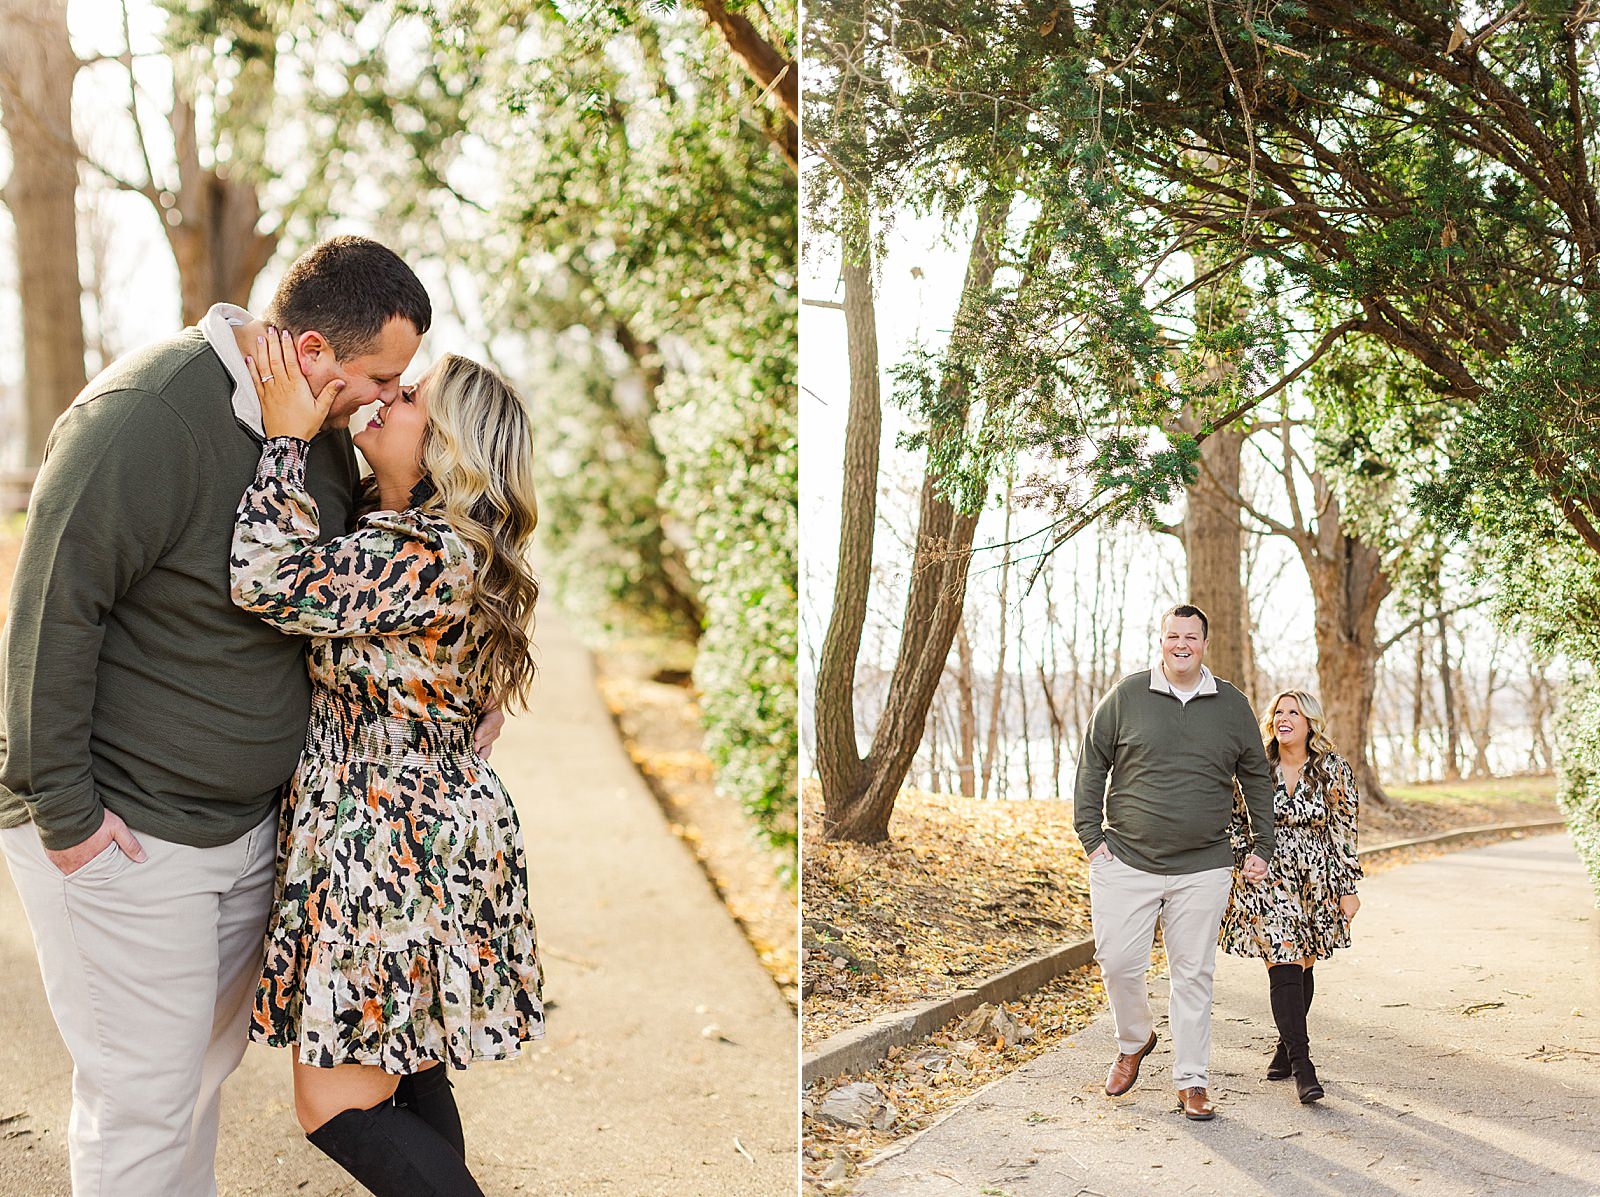 A Winter Downtown Newburgh Engagement Session | Paige and Dylan10.jpg